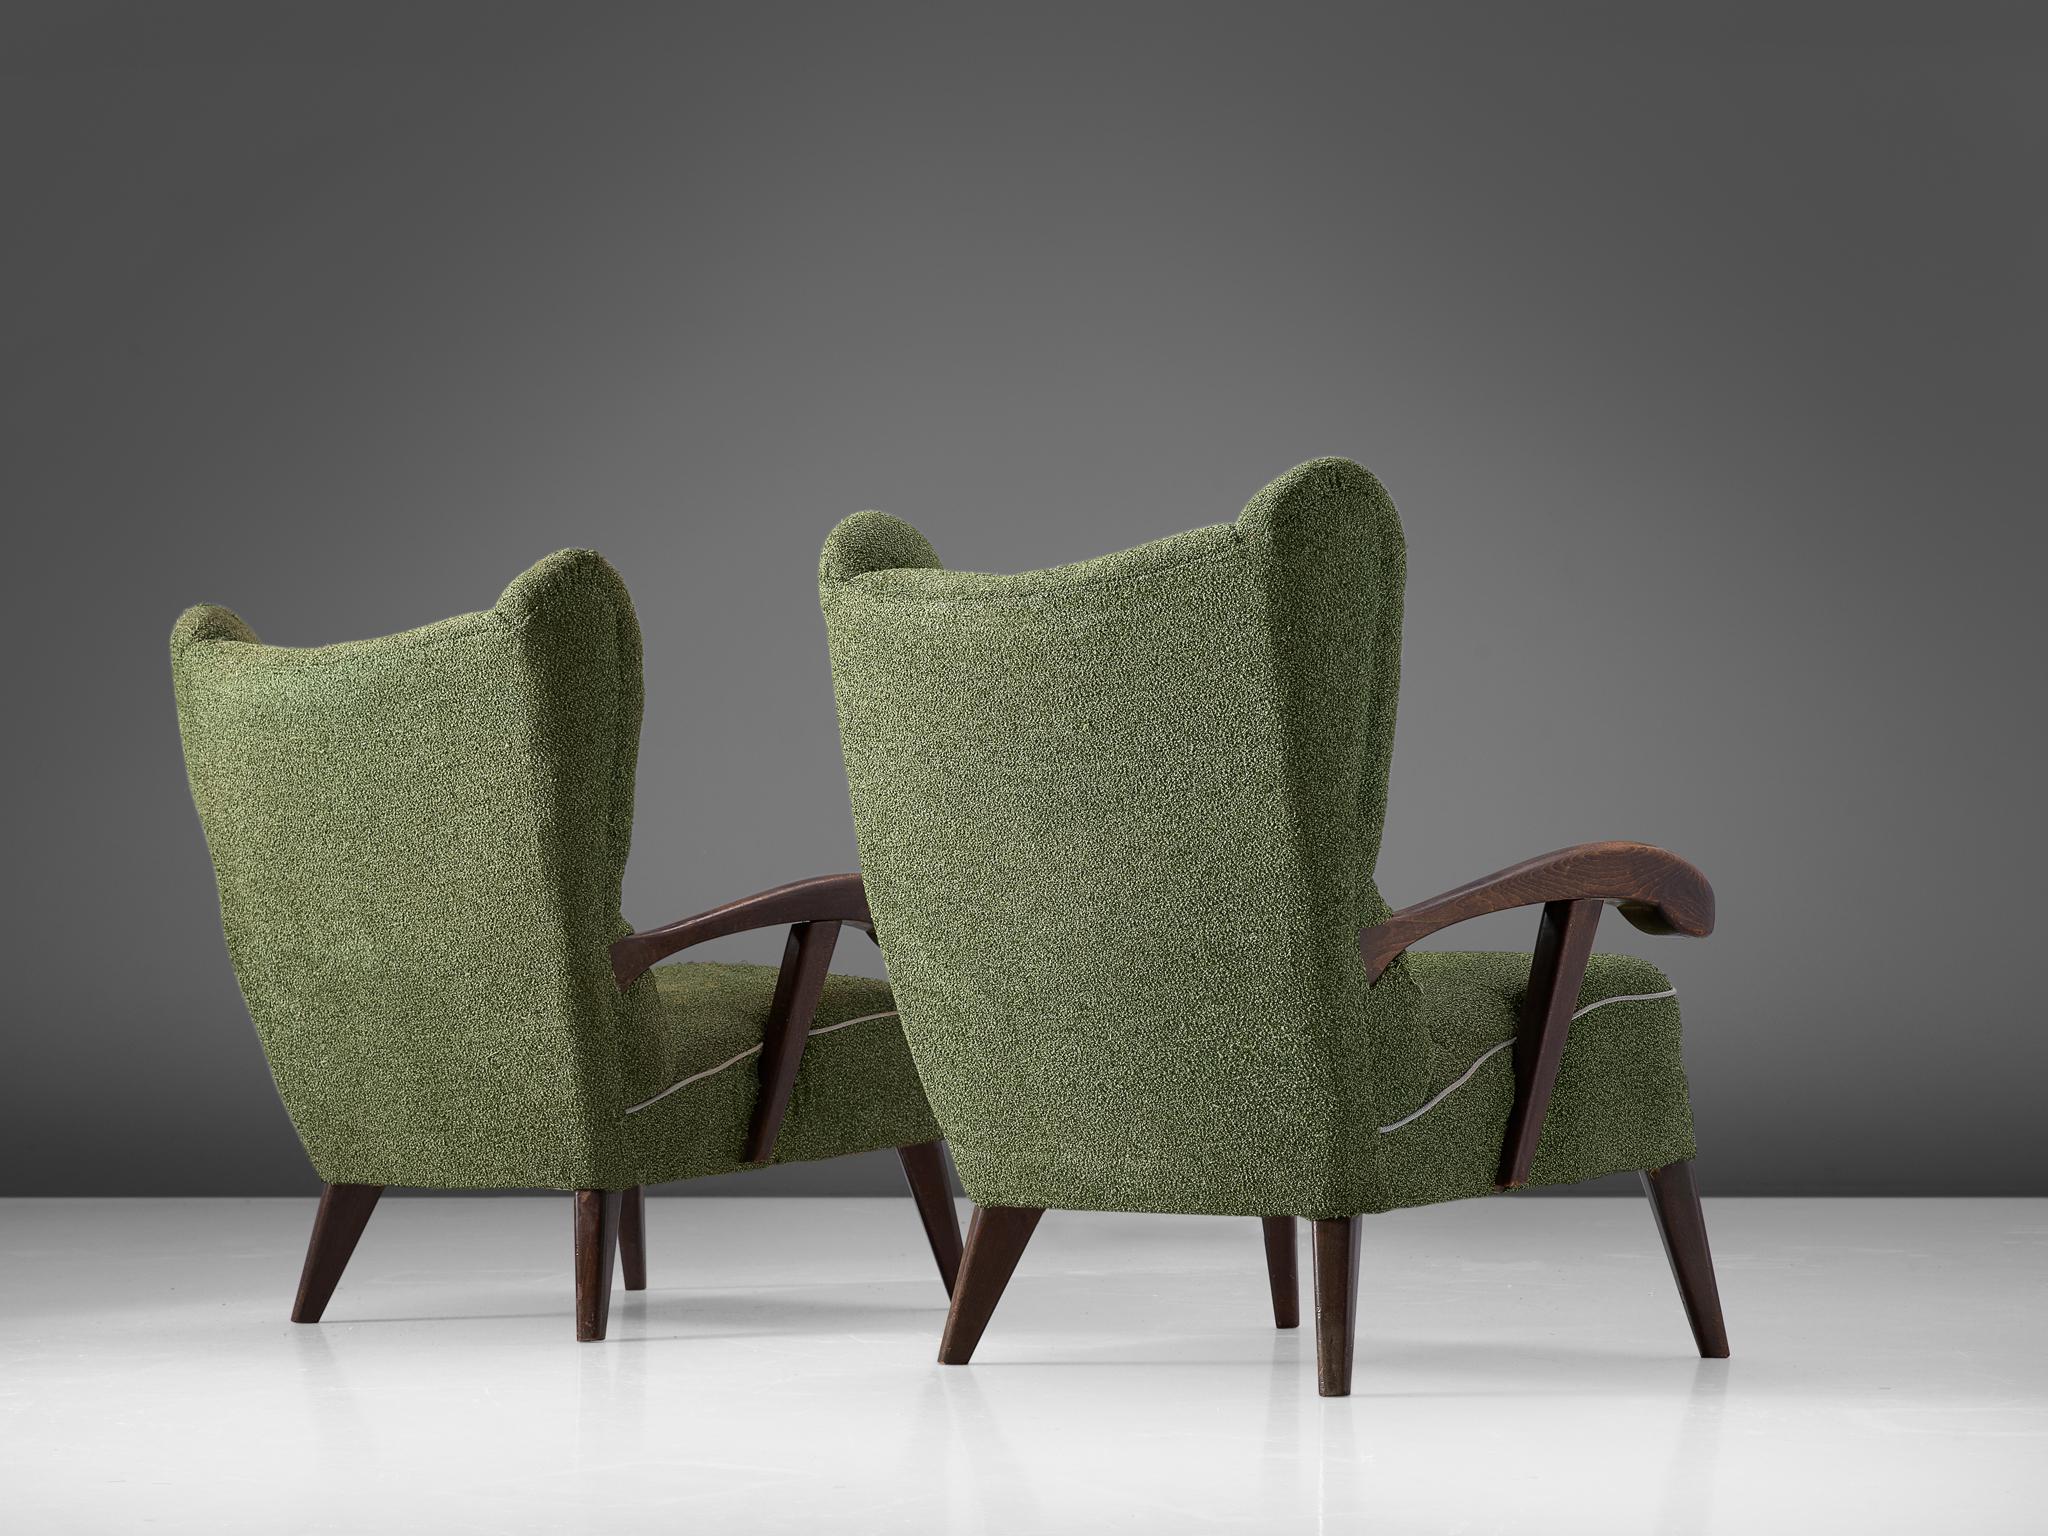 Czech Pair of Armchairs to Be Reupholstered, 1950s